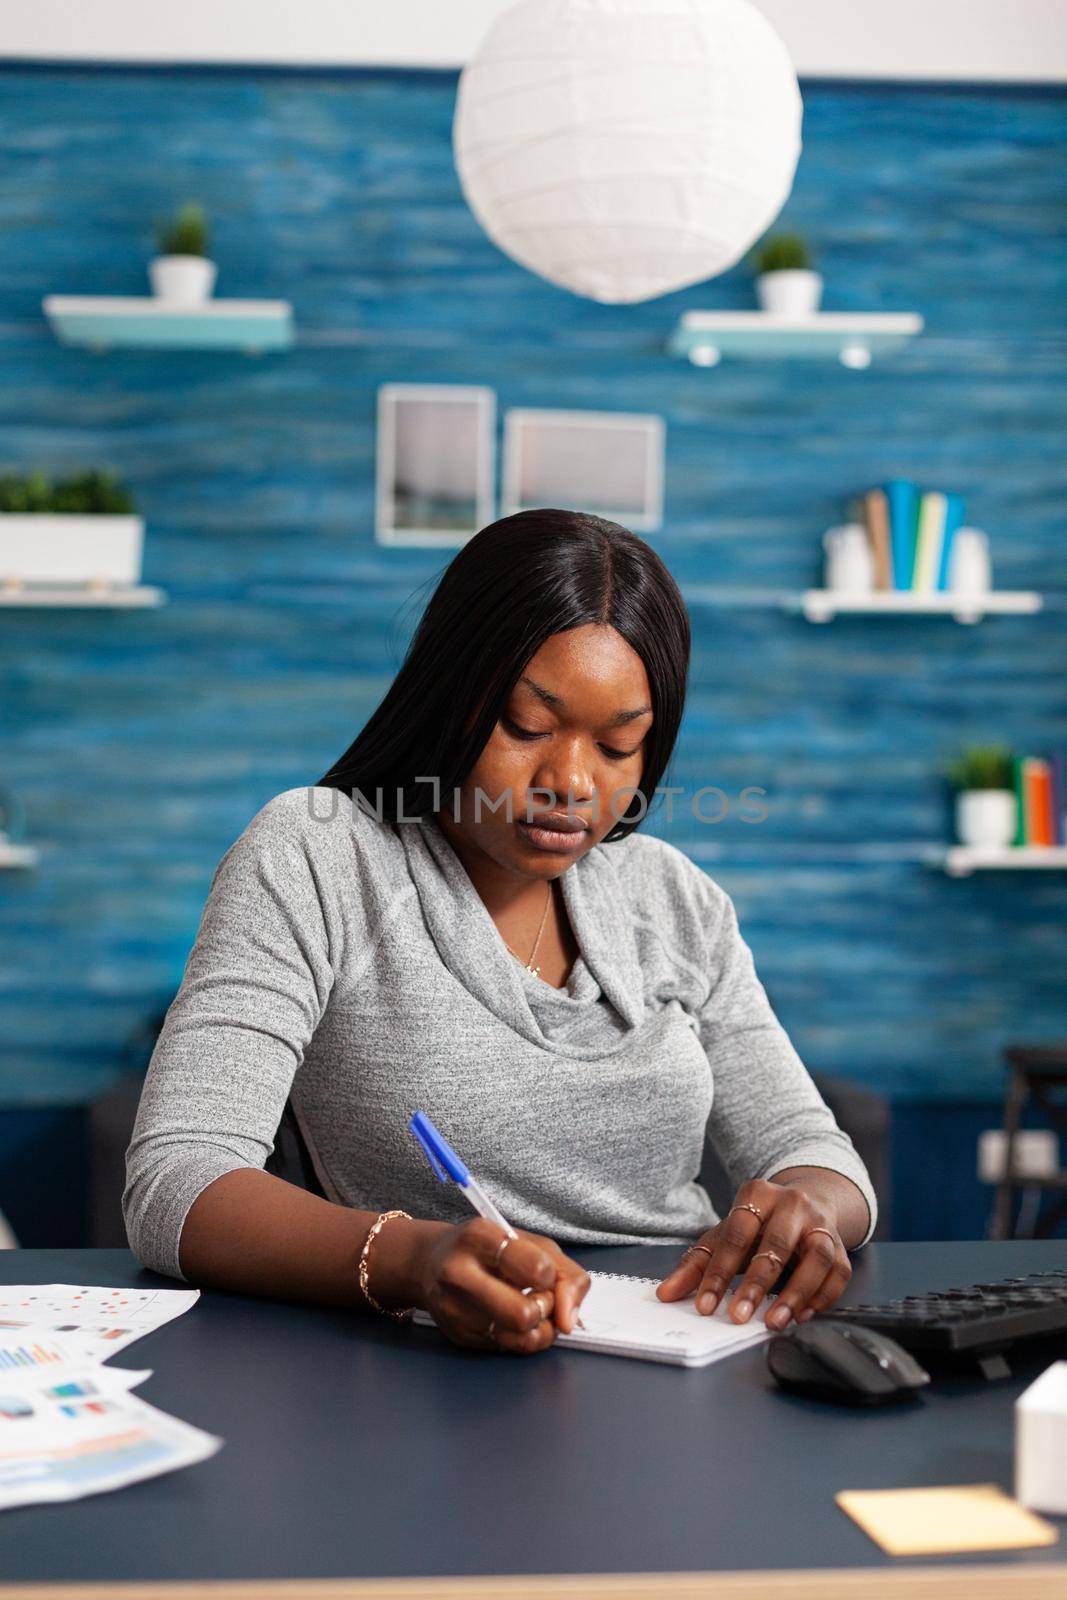 African american student working remote from home studying math lesson writing academic homework on notebook. Black student sitting at desk in living room during university education webinar